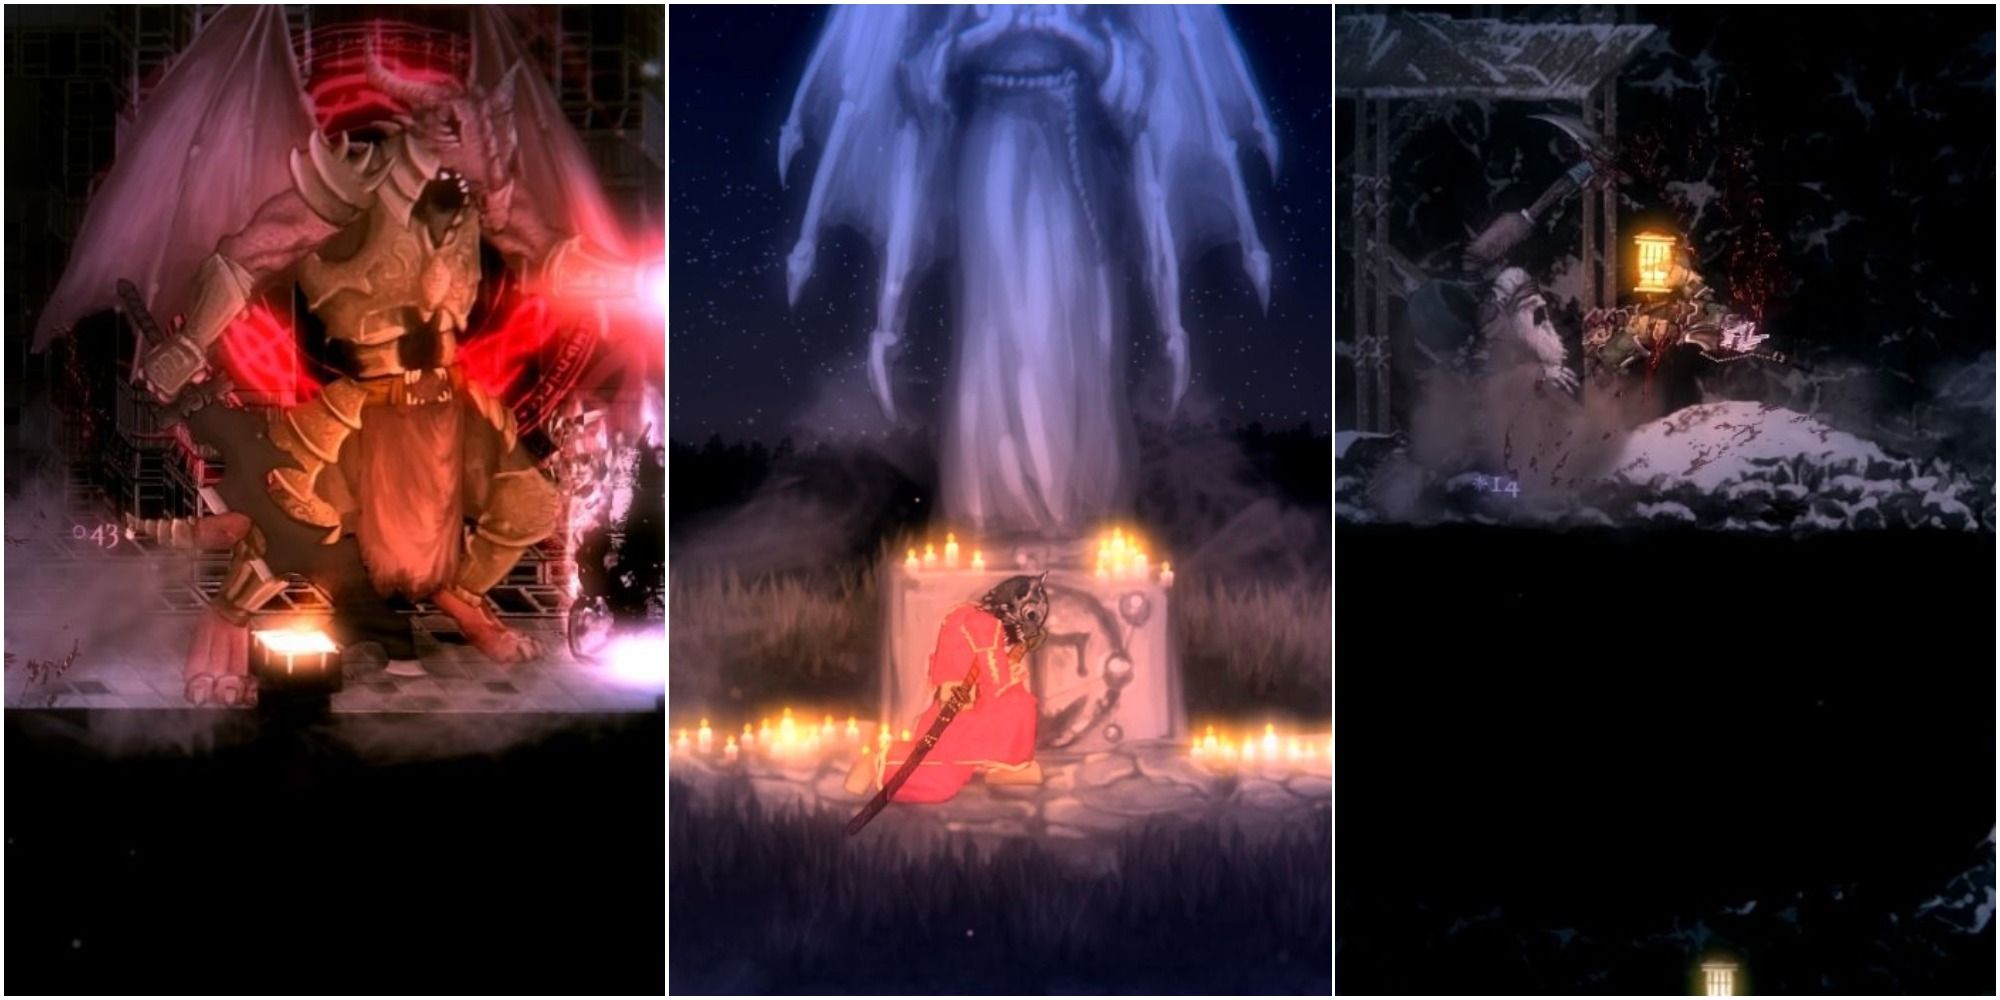 A split image clips from Salt and Sacrifice of a dracomancer, the marked inquisitor leveling up, and also being decked by a large enemy